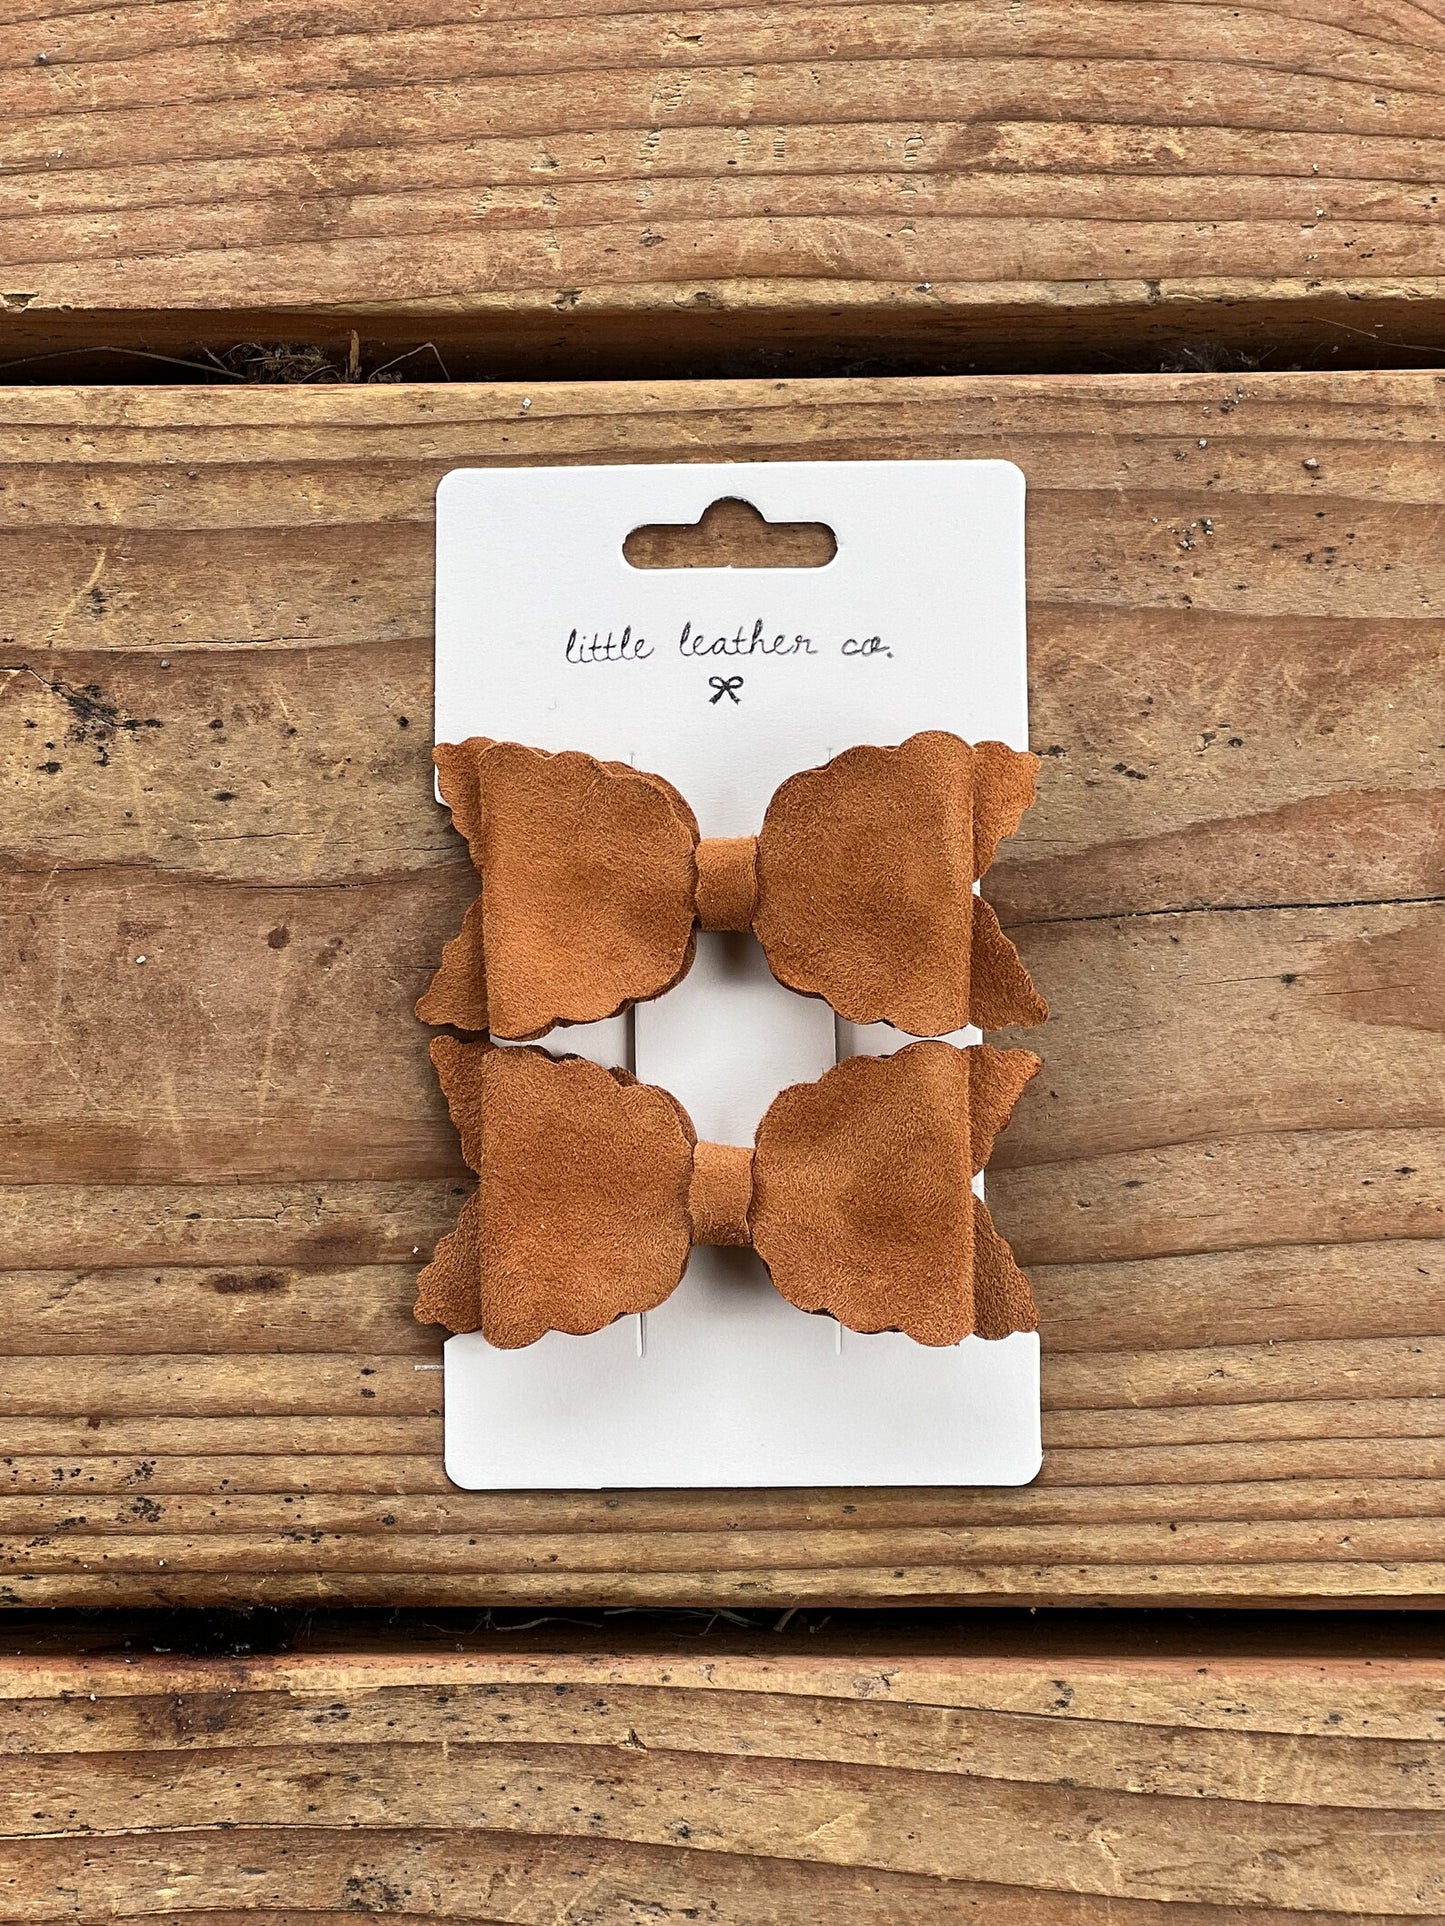 The Scalloped Bow Set - Scalloped Leather Hair Bows - Toddler Hair Bows - Leather Hair Clips